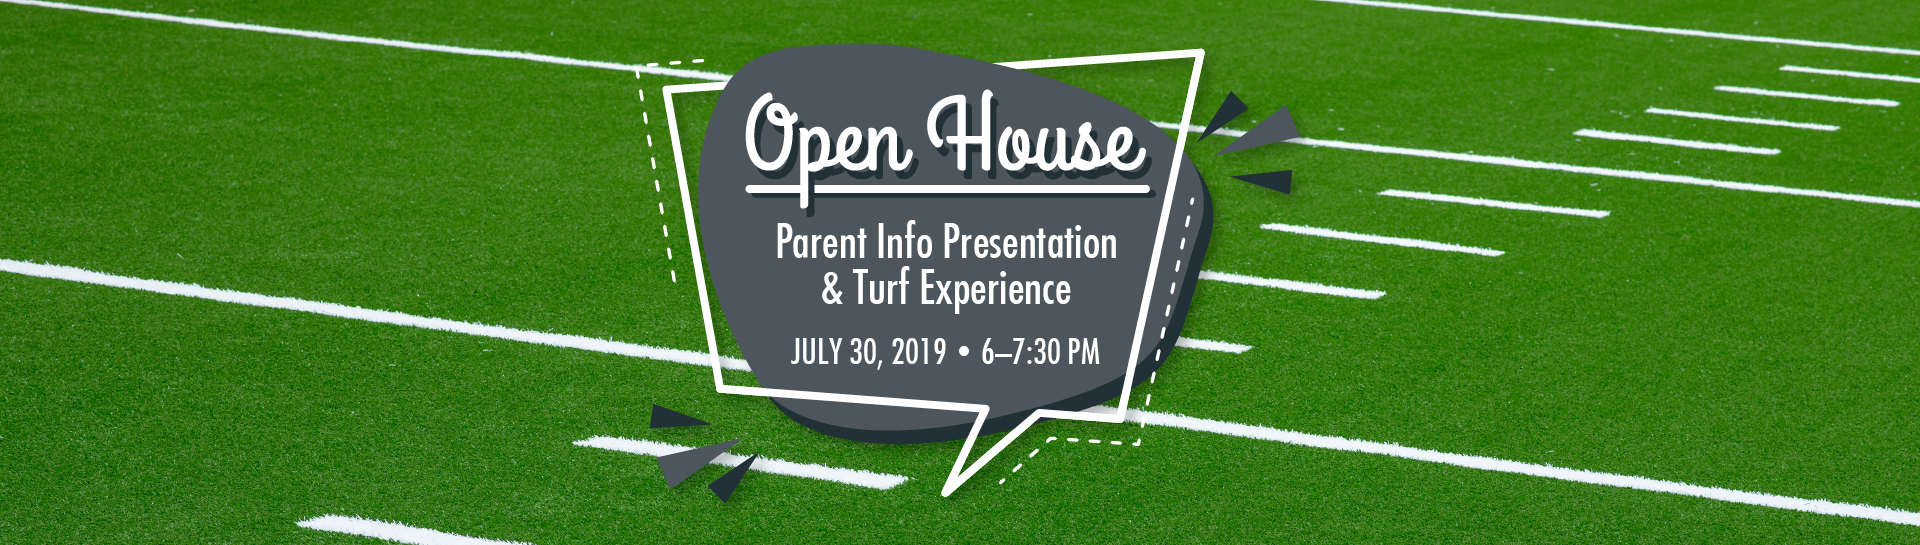 Open House Parent Info Presentation and Turf Experience - July 30